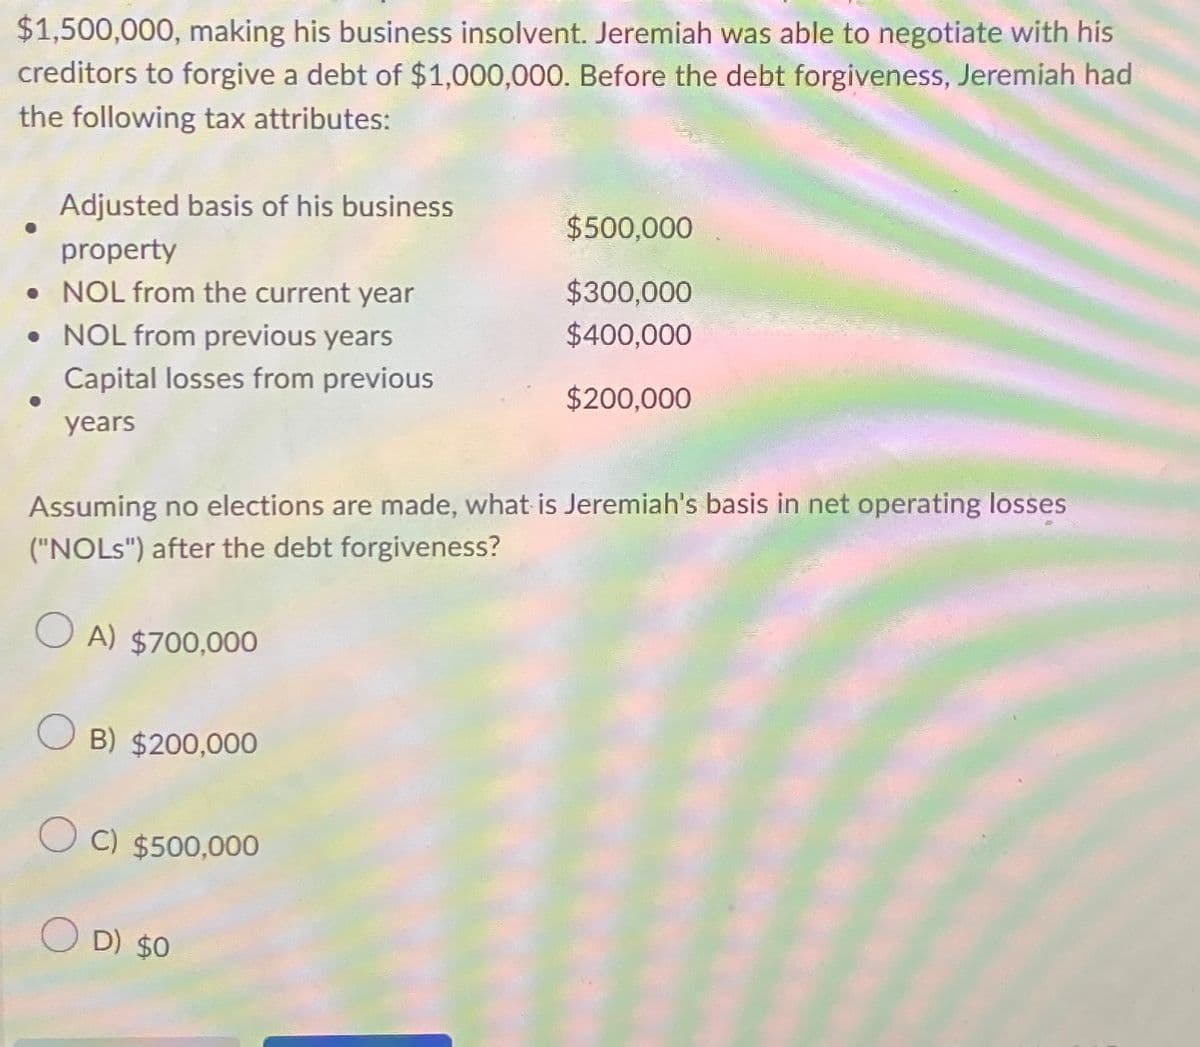 $1,500,000, making his business insolvent. Jeremiah was able to negotiate with his
creditors to forgive a debt of $1,000,000. Before the debt forgiveness, Jeremiah had
the following tax attributes:
Adjusted basis of his business
property
. NOL from the current year
• NOL from previous years
Capital losses from previous
years
$500,000
$300,000
$400,000
$200,000
Assuming no elections are made, what is Jeremiah's basis in net operating losses
("NOLS") after the debt forgiveness?
OA) $700,000
OB) $200,000
O C) $500,000
OD) $0